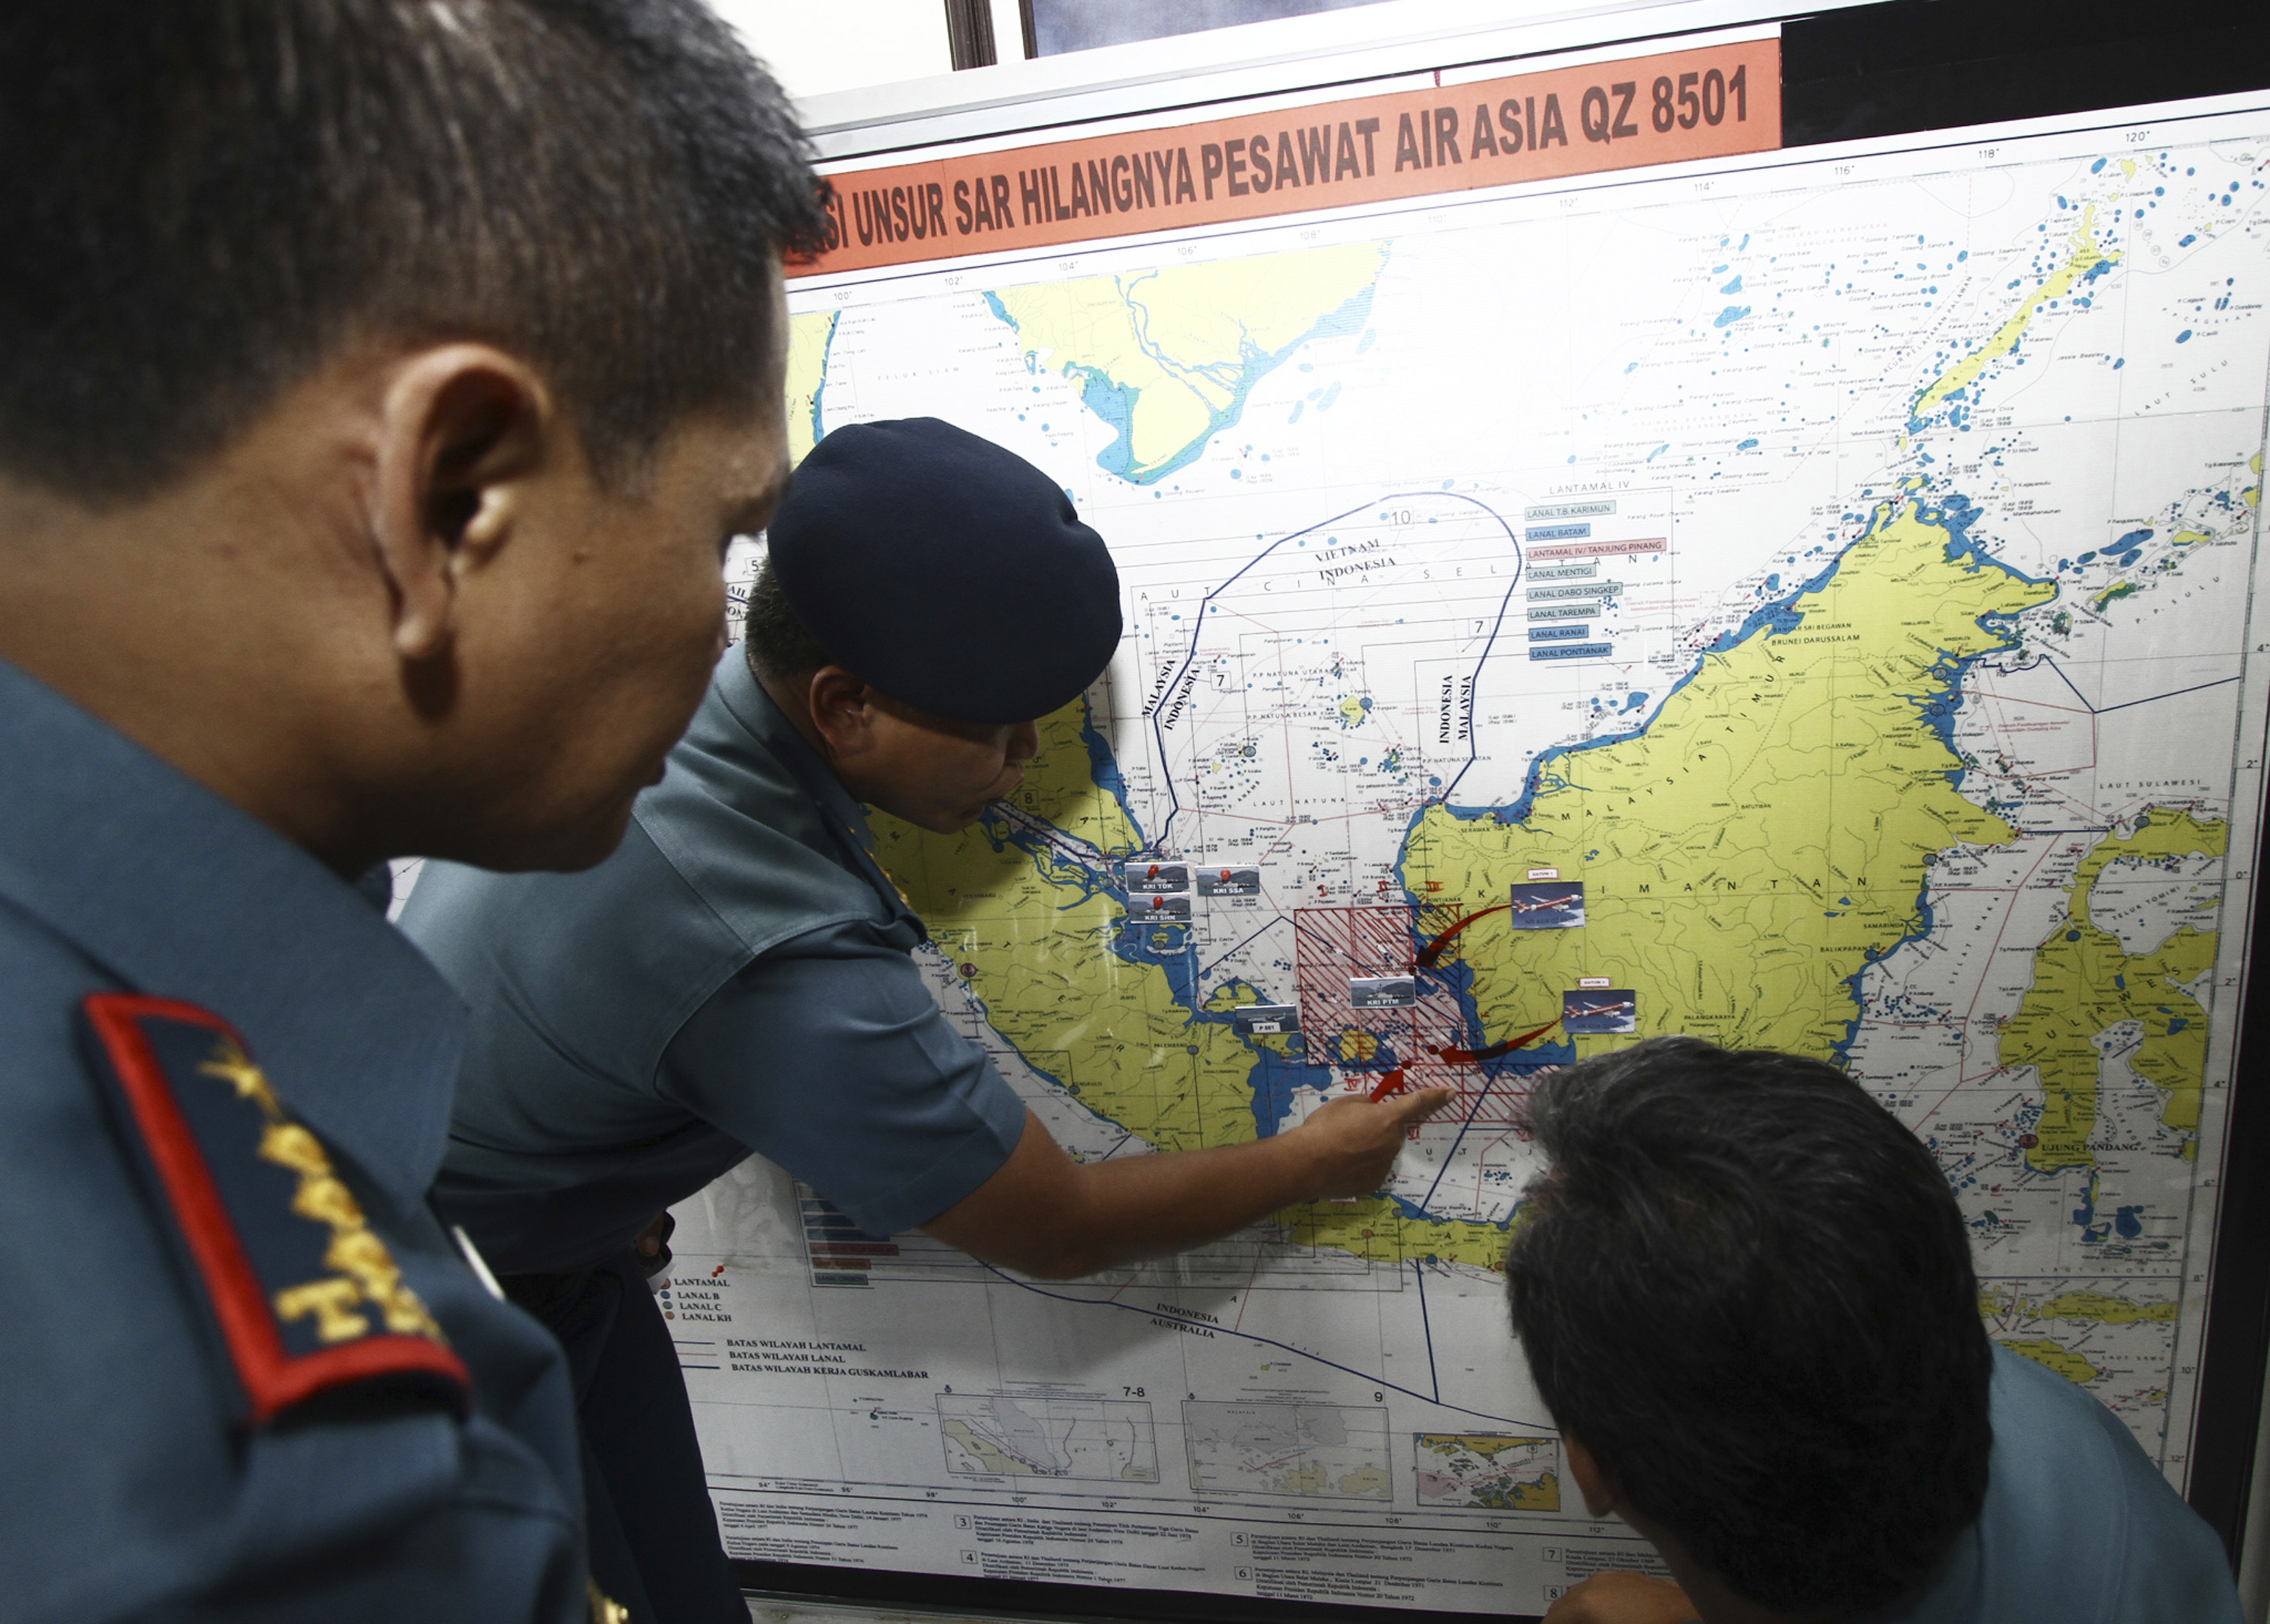 Navy soldiers work on a map of Indonesia monitoring all Navy ships from Indonesia, Singapore, and Malaysia involved in the joint search and rescue operation for AirAsia flight QZ8501 at a navy base on Batam island